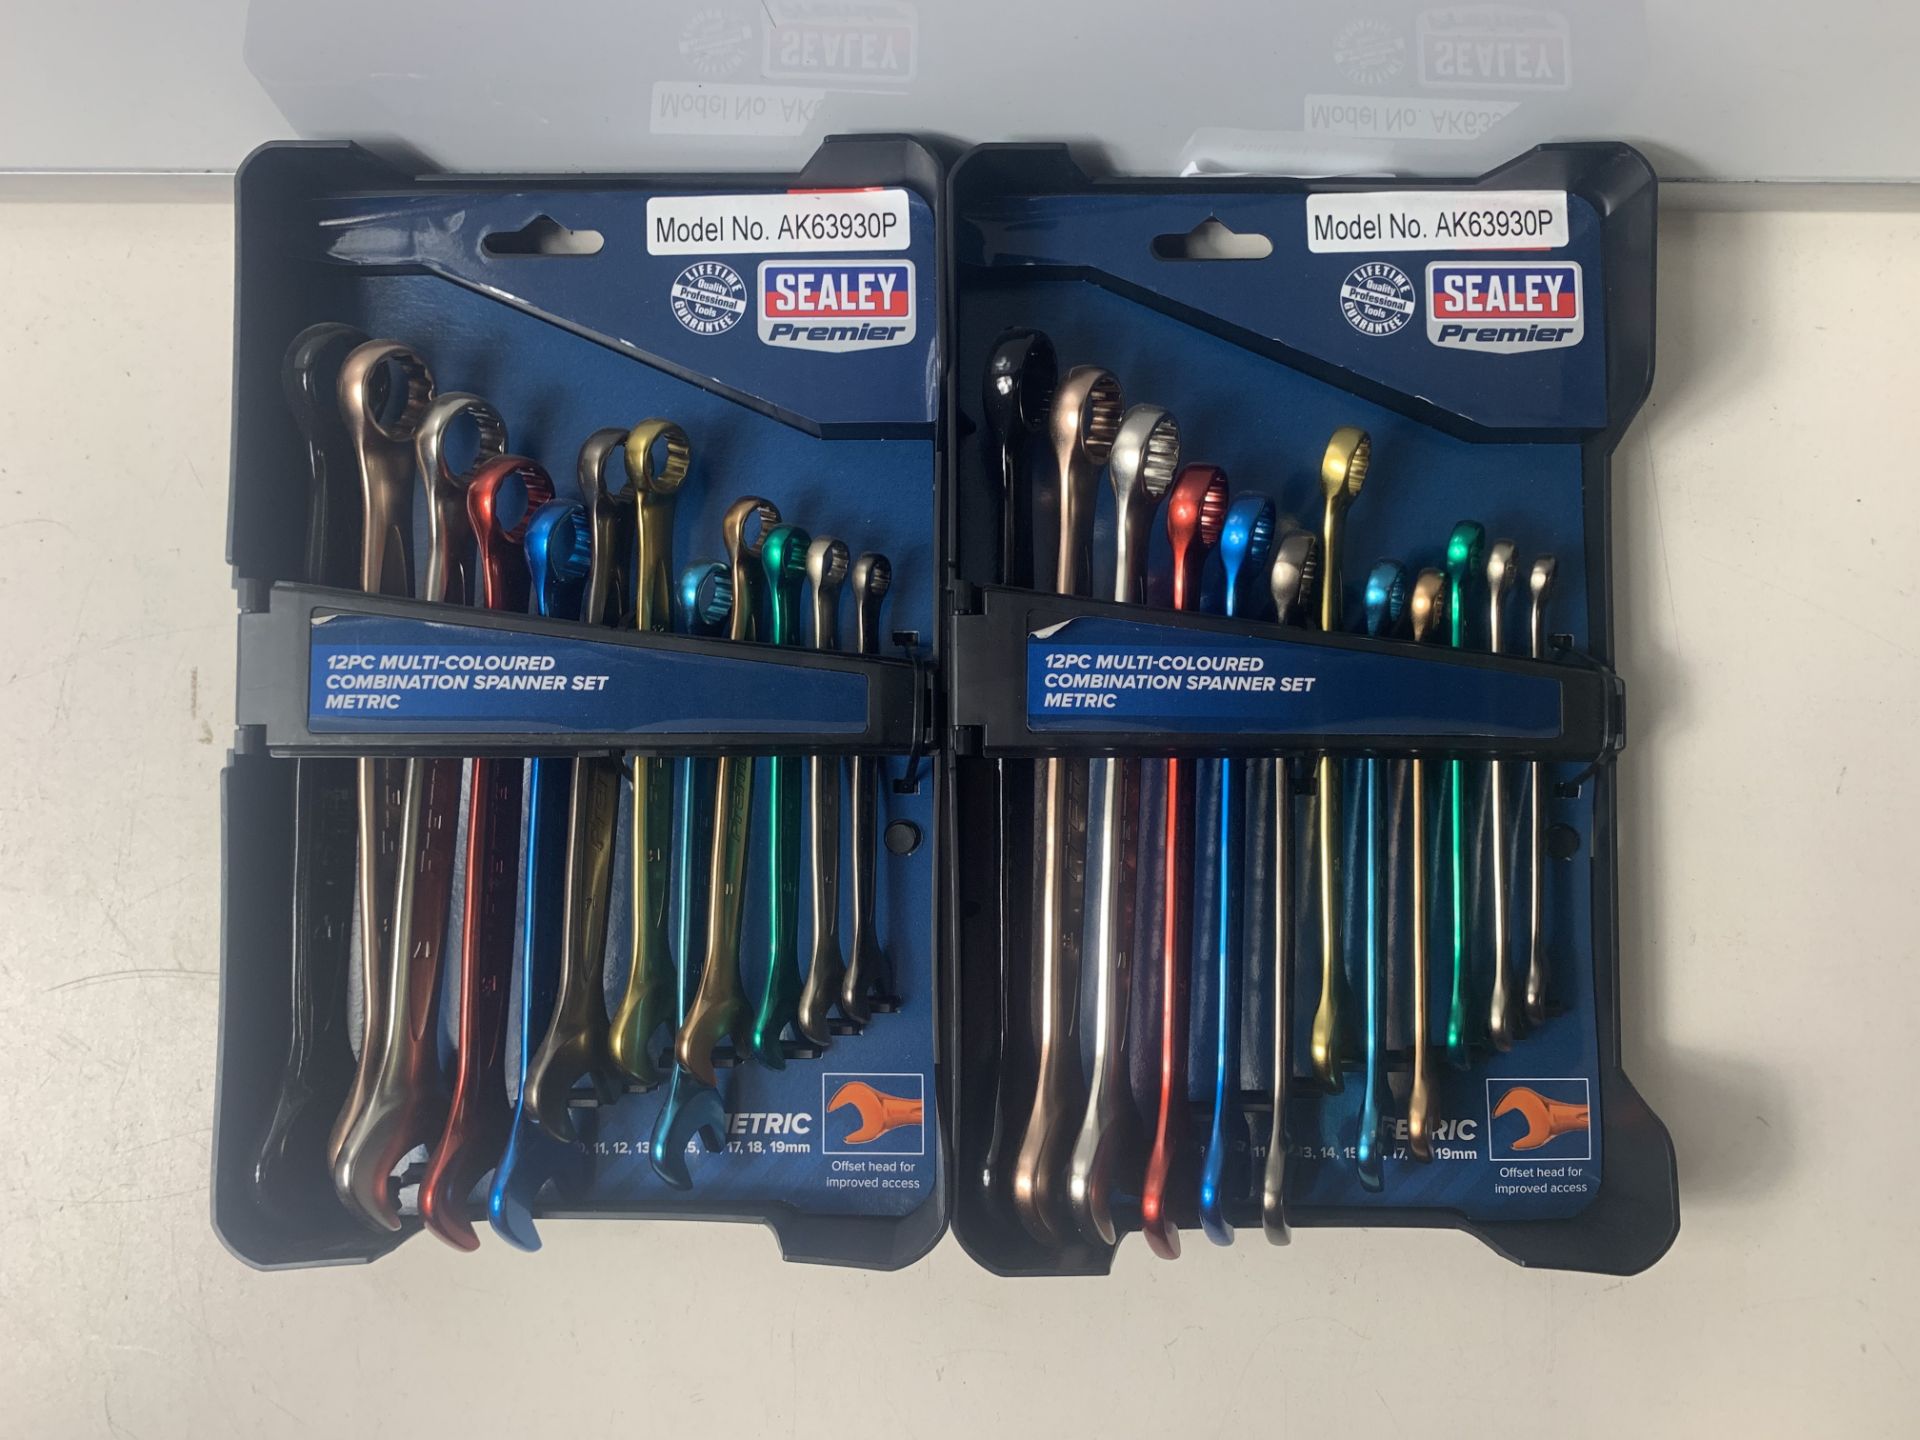 2 x Sealey Premier 12pc Multi Coloured Combination Spanner Set 8-19mm Open End Ring